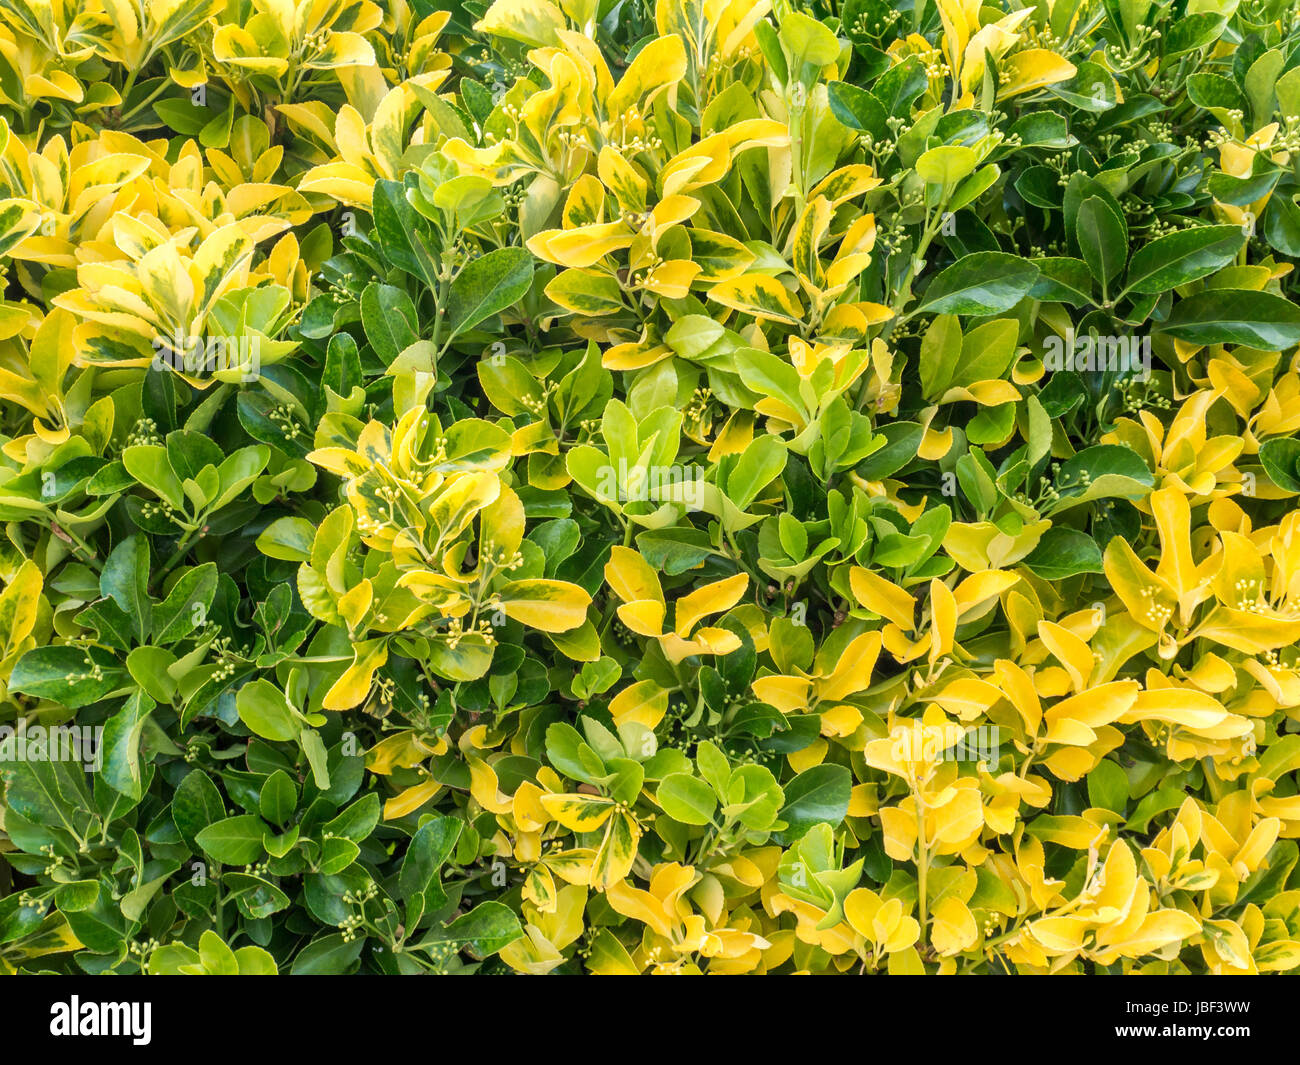 Variegated green and yellow golden euonymous bush hedge Stock Photo - Alamy